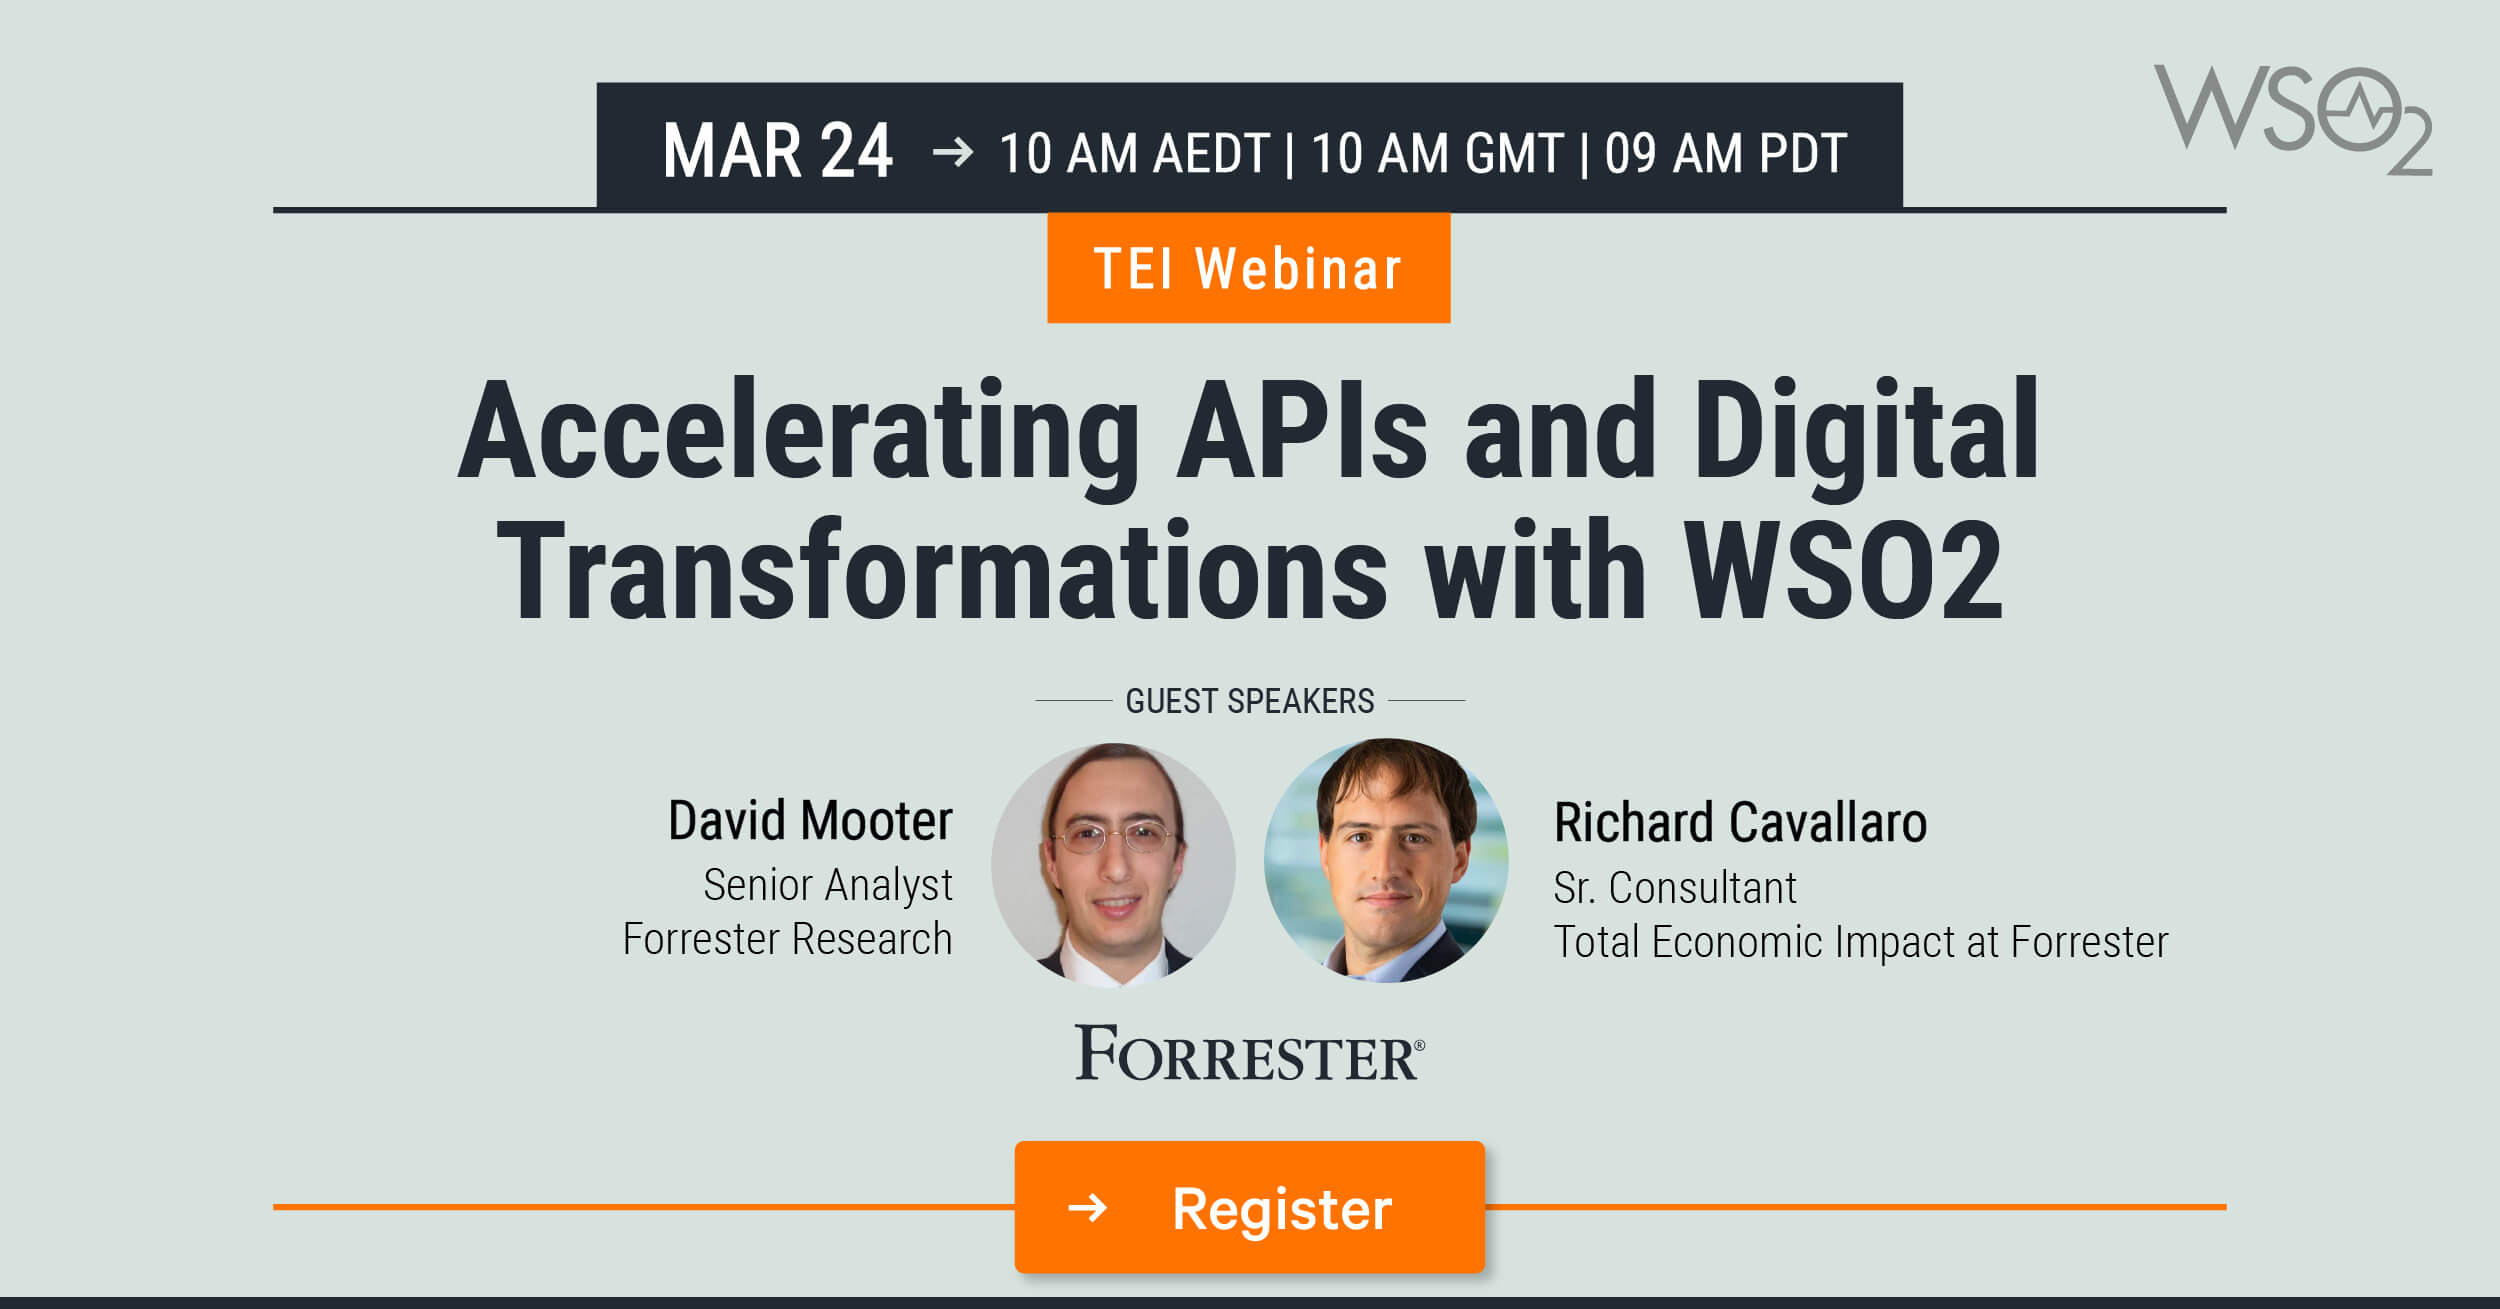 TEI Webinar Featuring Forrester: Accelerating APIs and Digital Transformations with WSO2